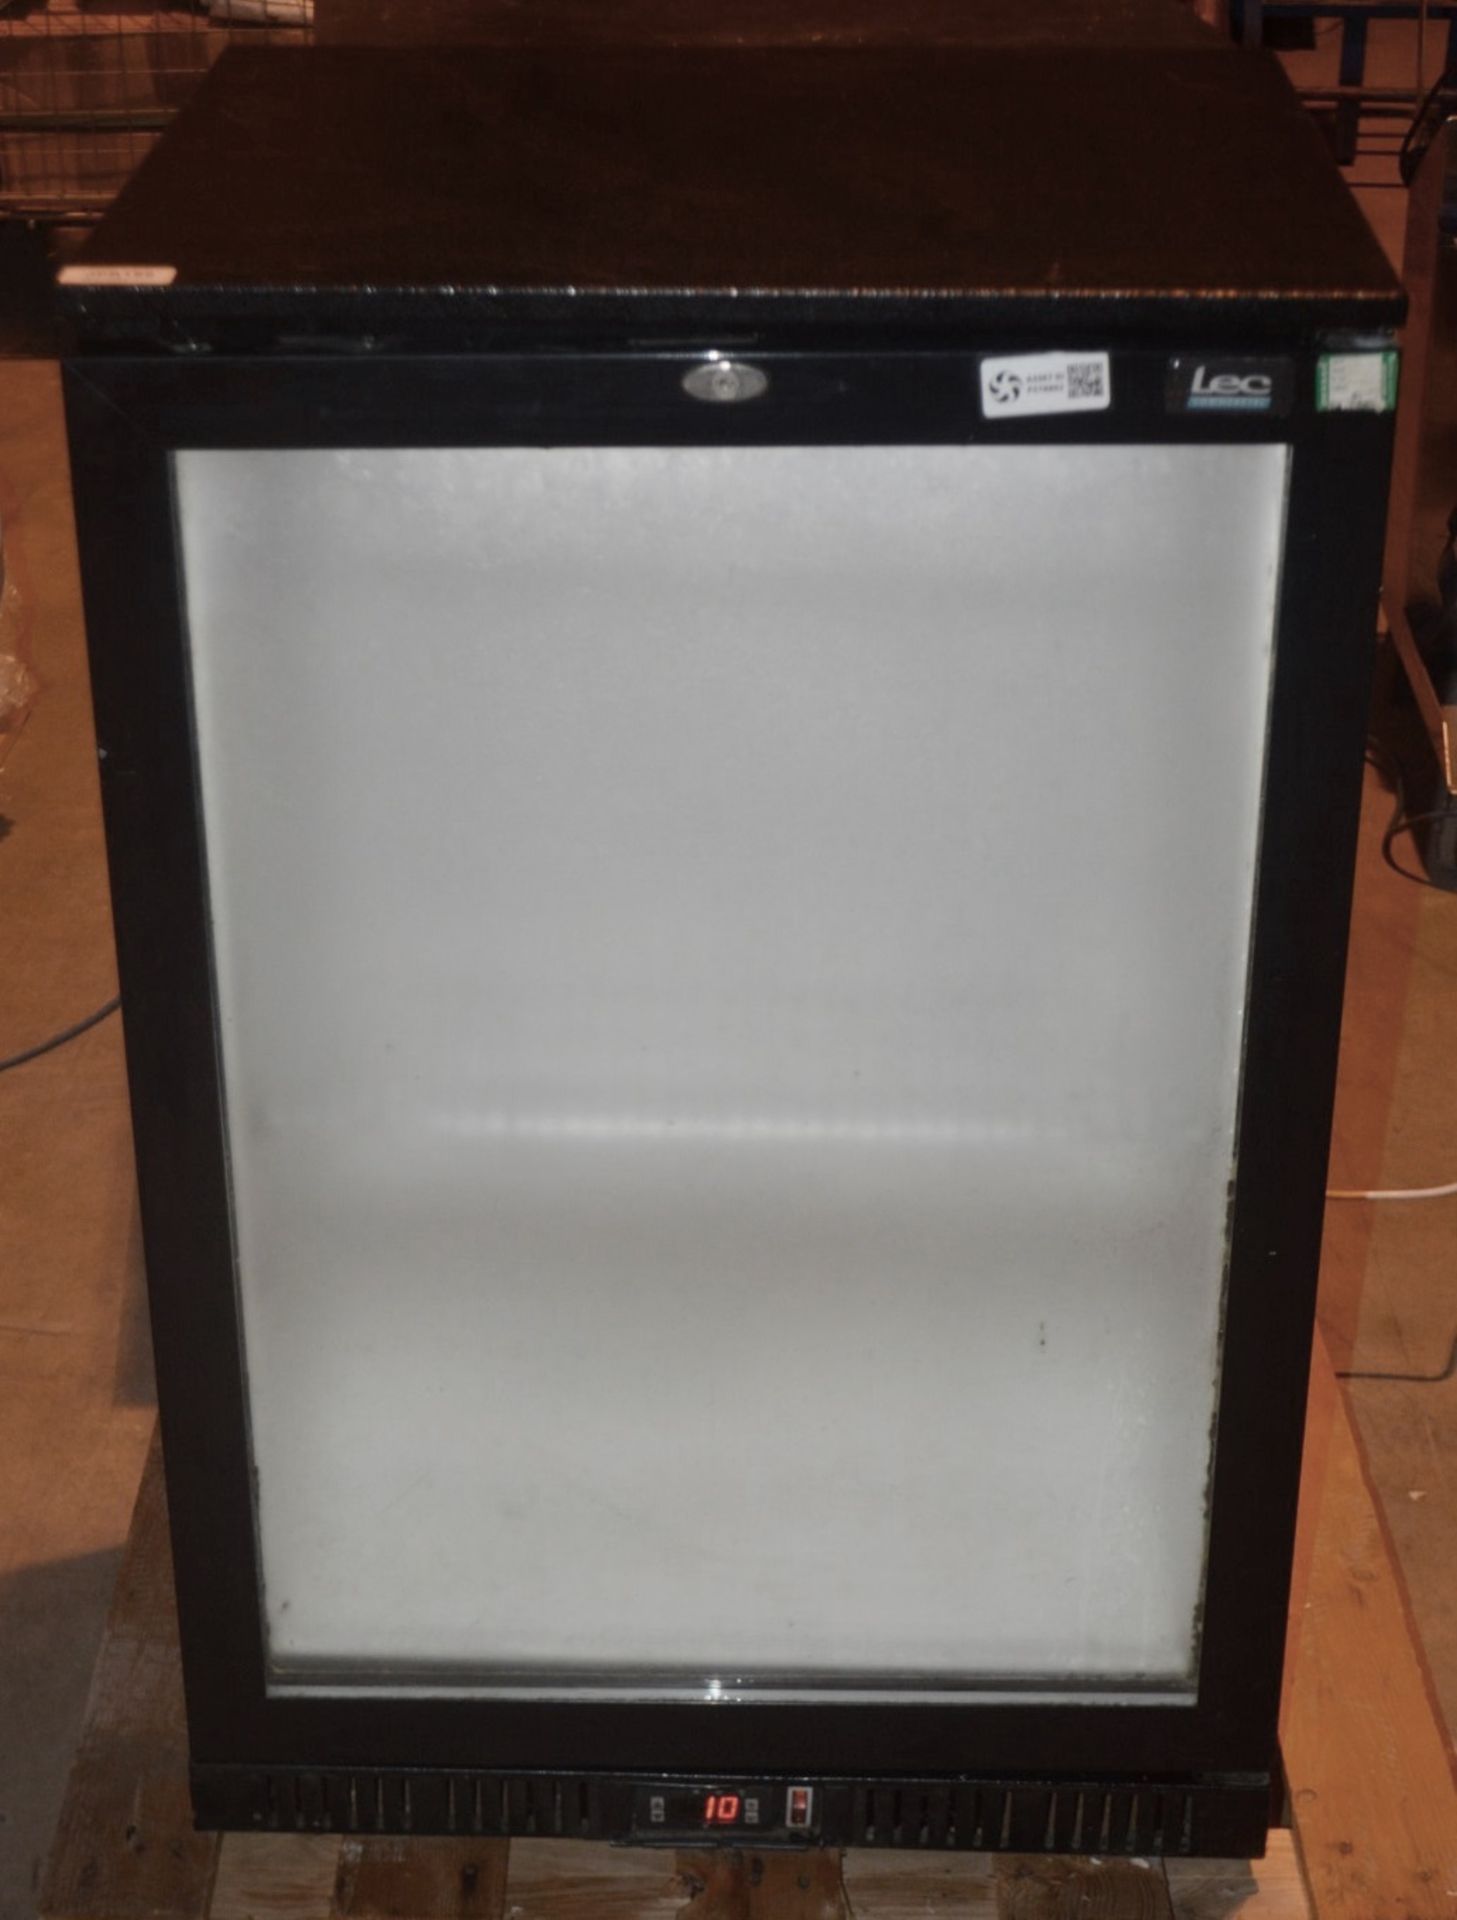 1 x LEC Commercial Bottle Fridge With Frosted Glass Doors - Dimensions: H90 x W60 x D50cm - Very